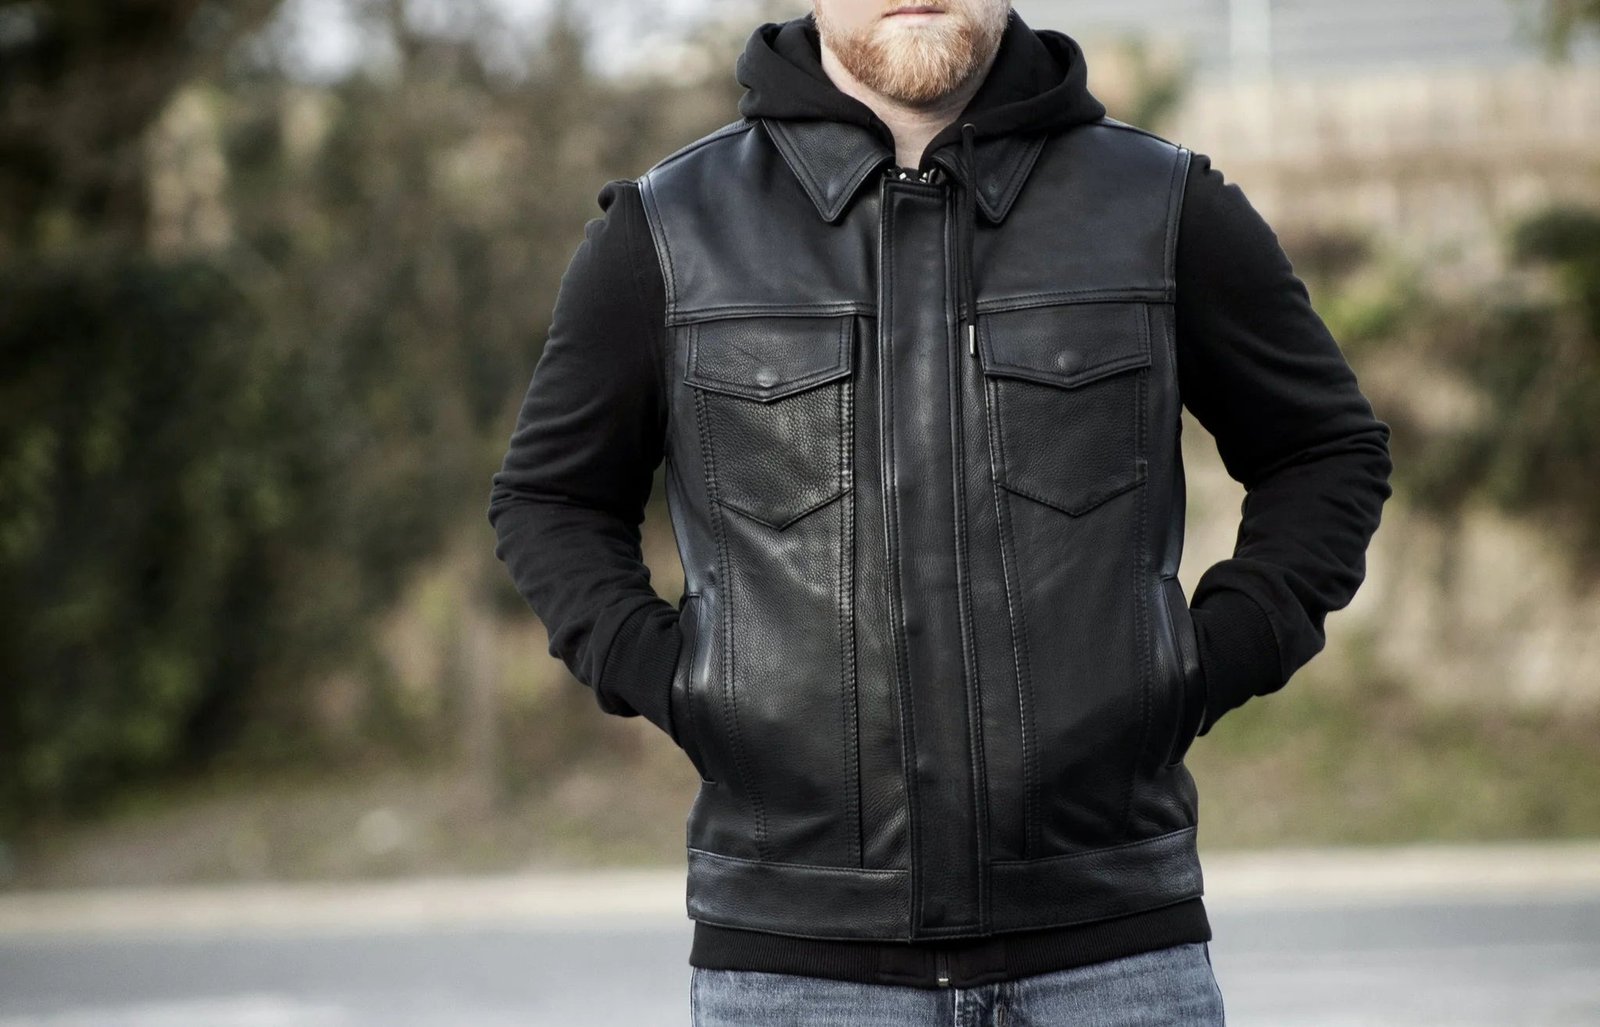 Biker with a leather biker vest: Classic Fantastic and Safety Purpose